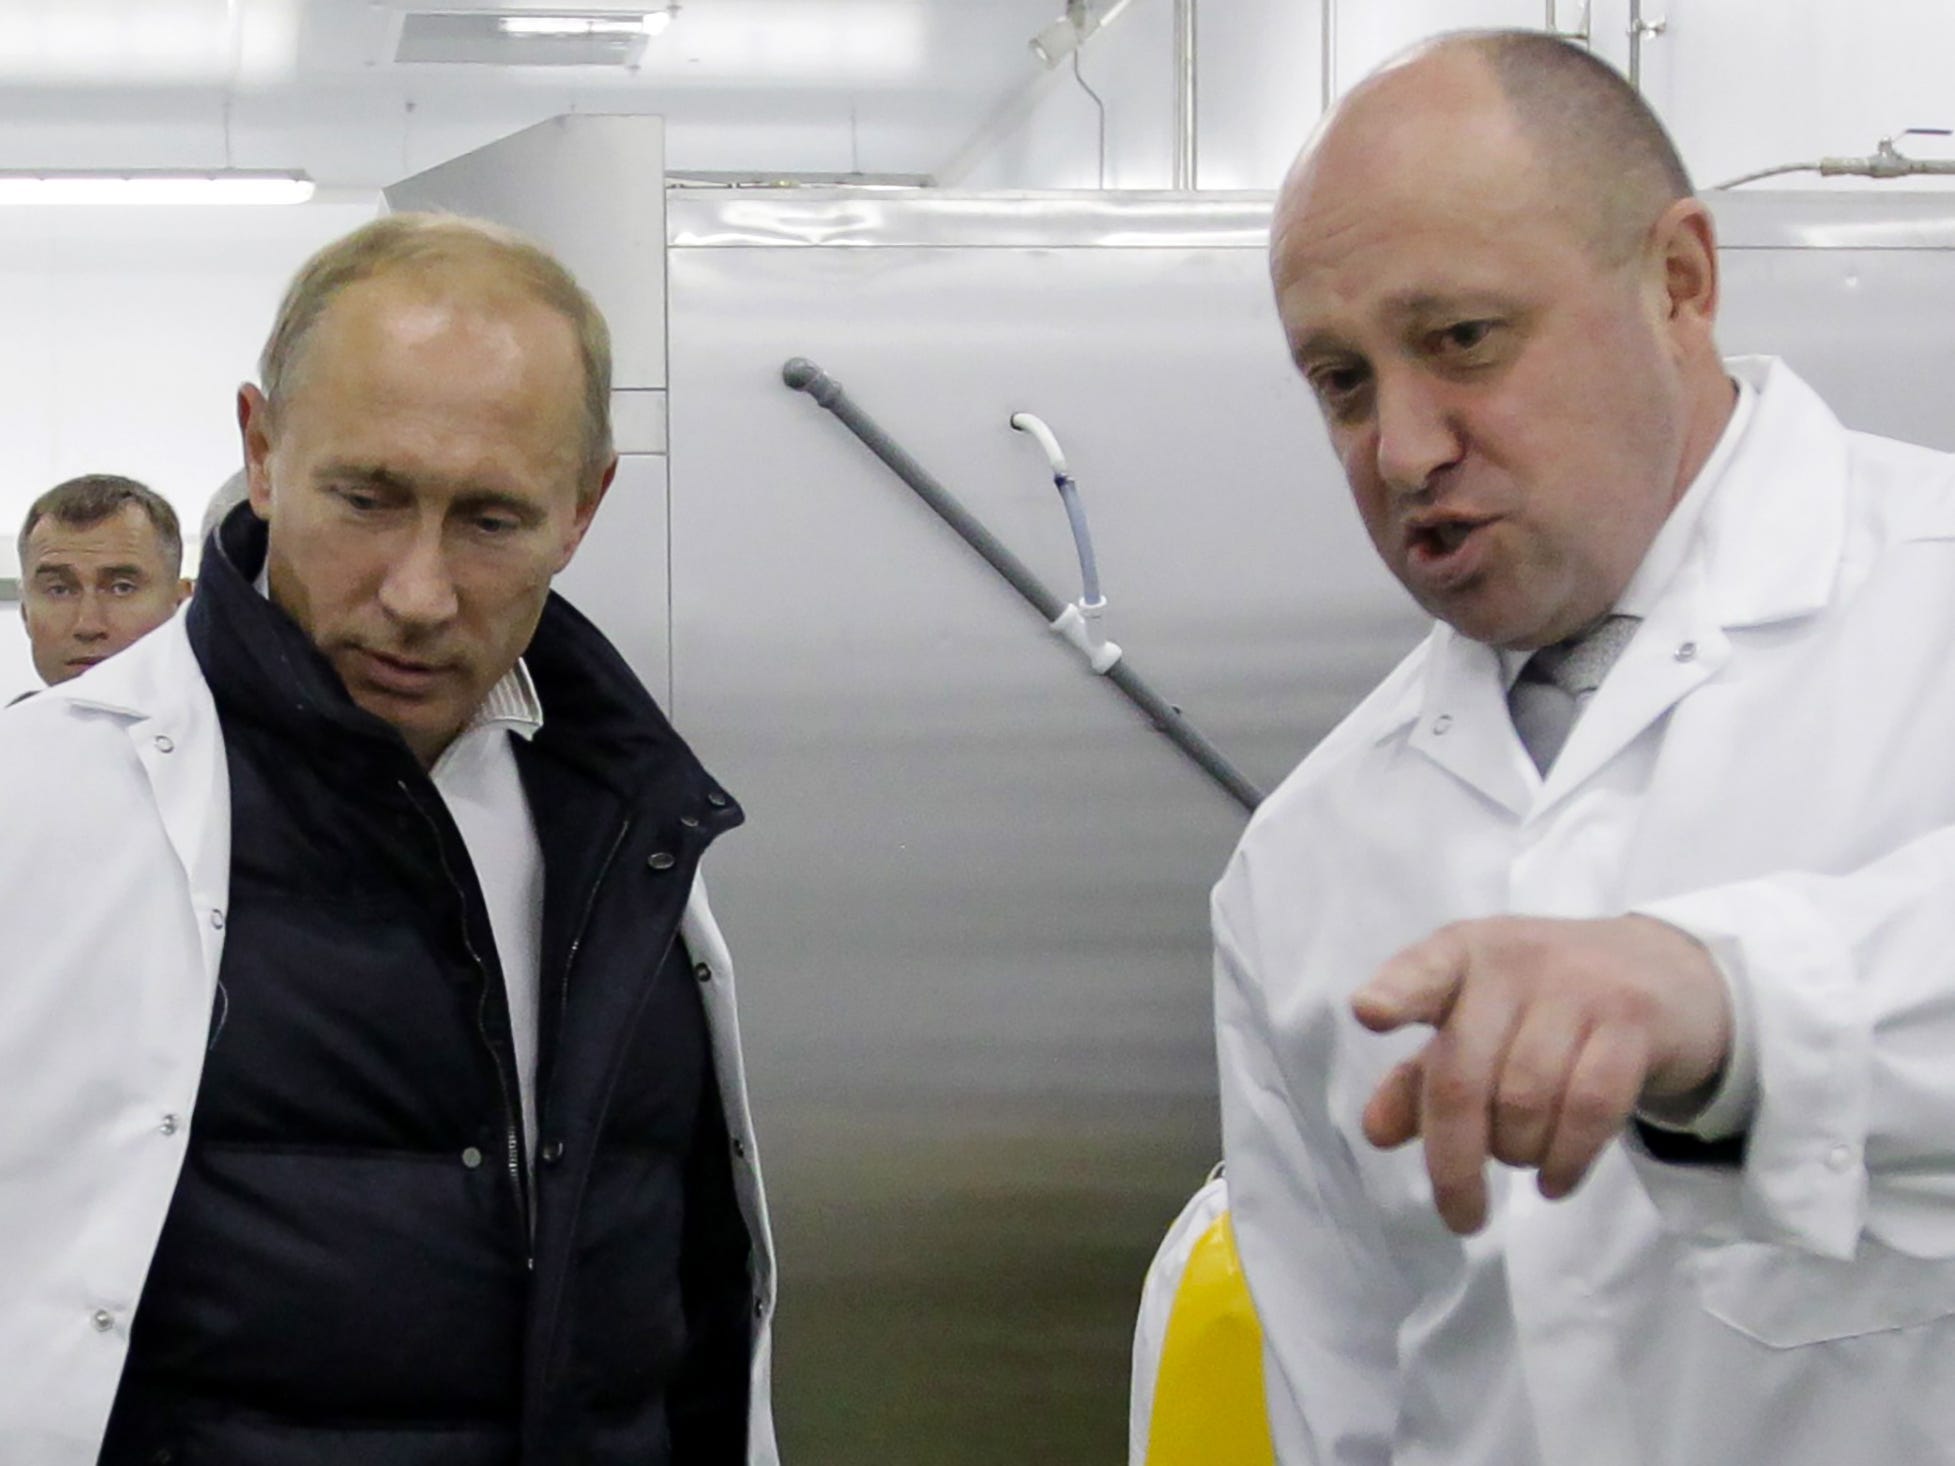 Putin and Prigozhin in white coats, with the latter pointing at something off-camera